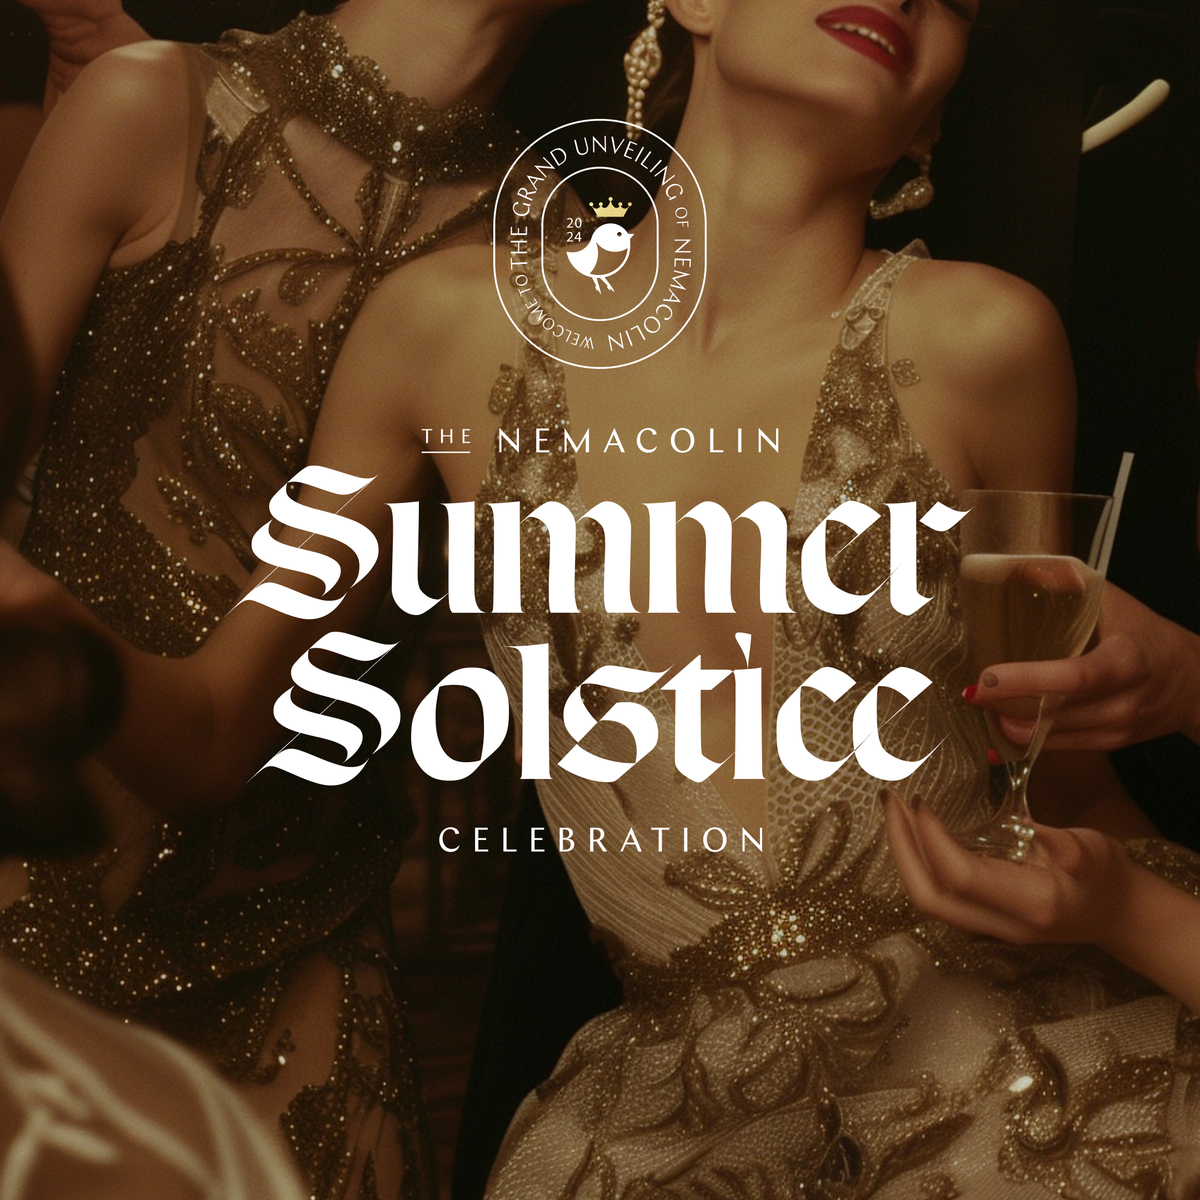 The season of sun starts with the party of a lifetime. From June 21-23, The Summer Solstice Celebration promises to be three days of star-studded spectacles, jaw-dropping cuisine, world-class entertainment, and magical wonders: nemacolin.com/summer-solstice